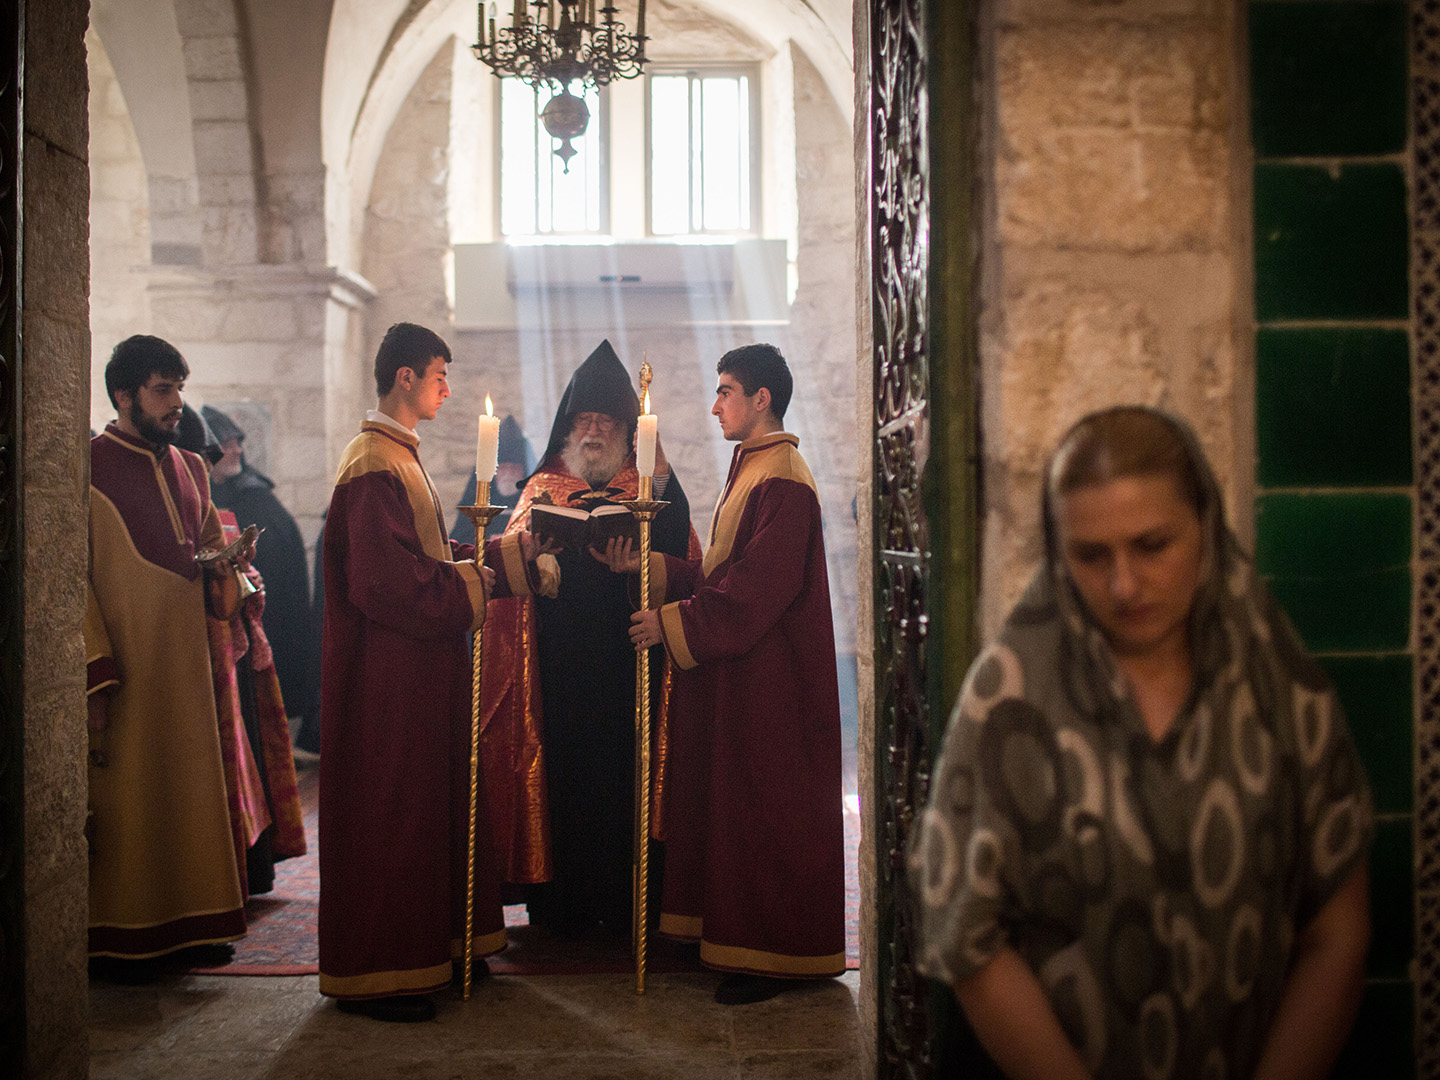 Armenian clergy perform a prayer service at the Holy Archangels Church in the Armenian Quarter.